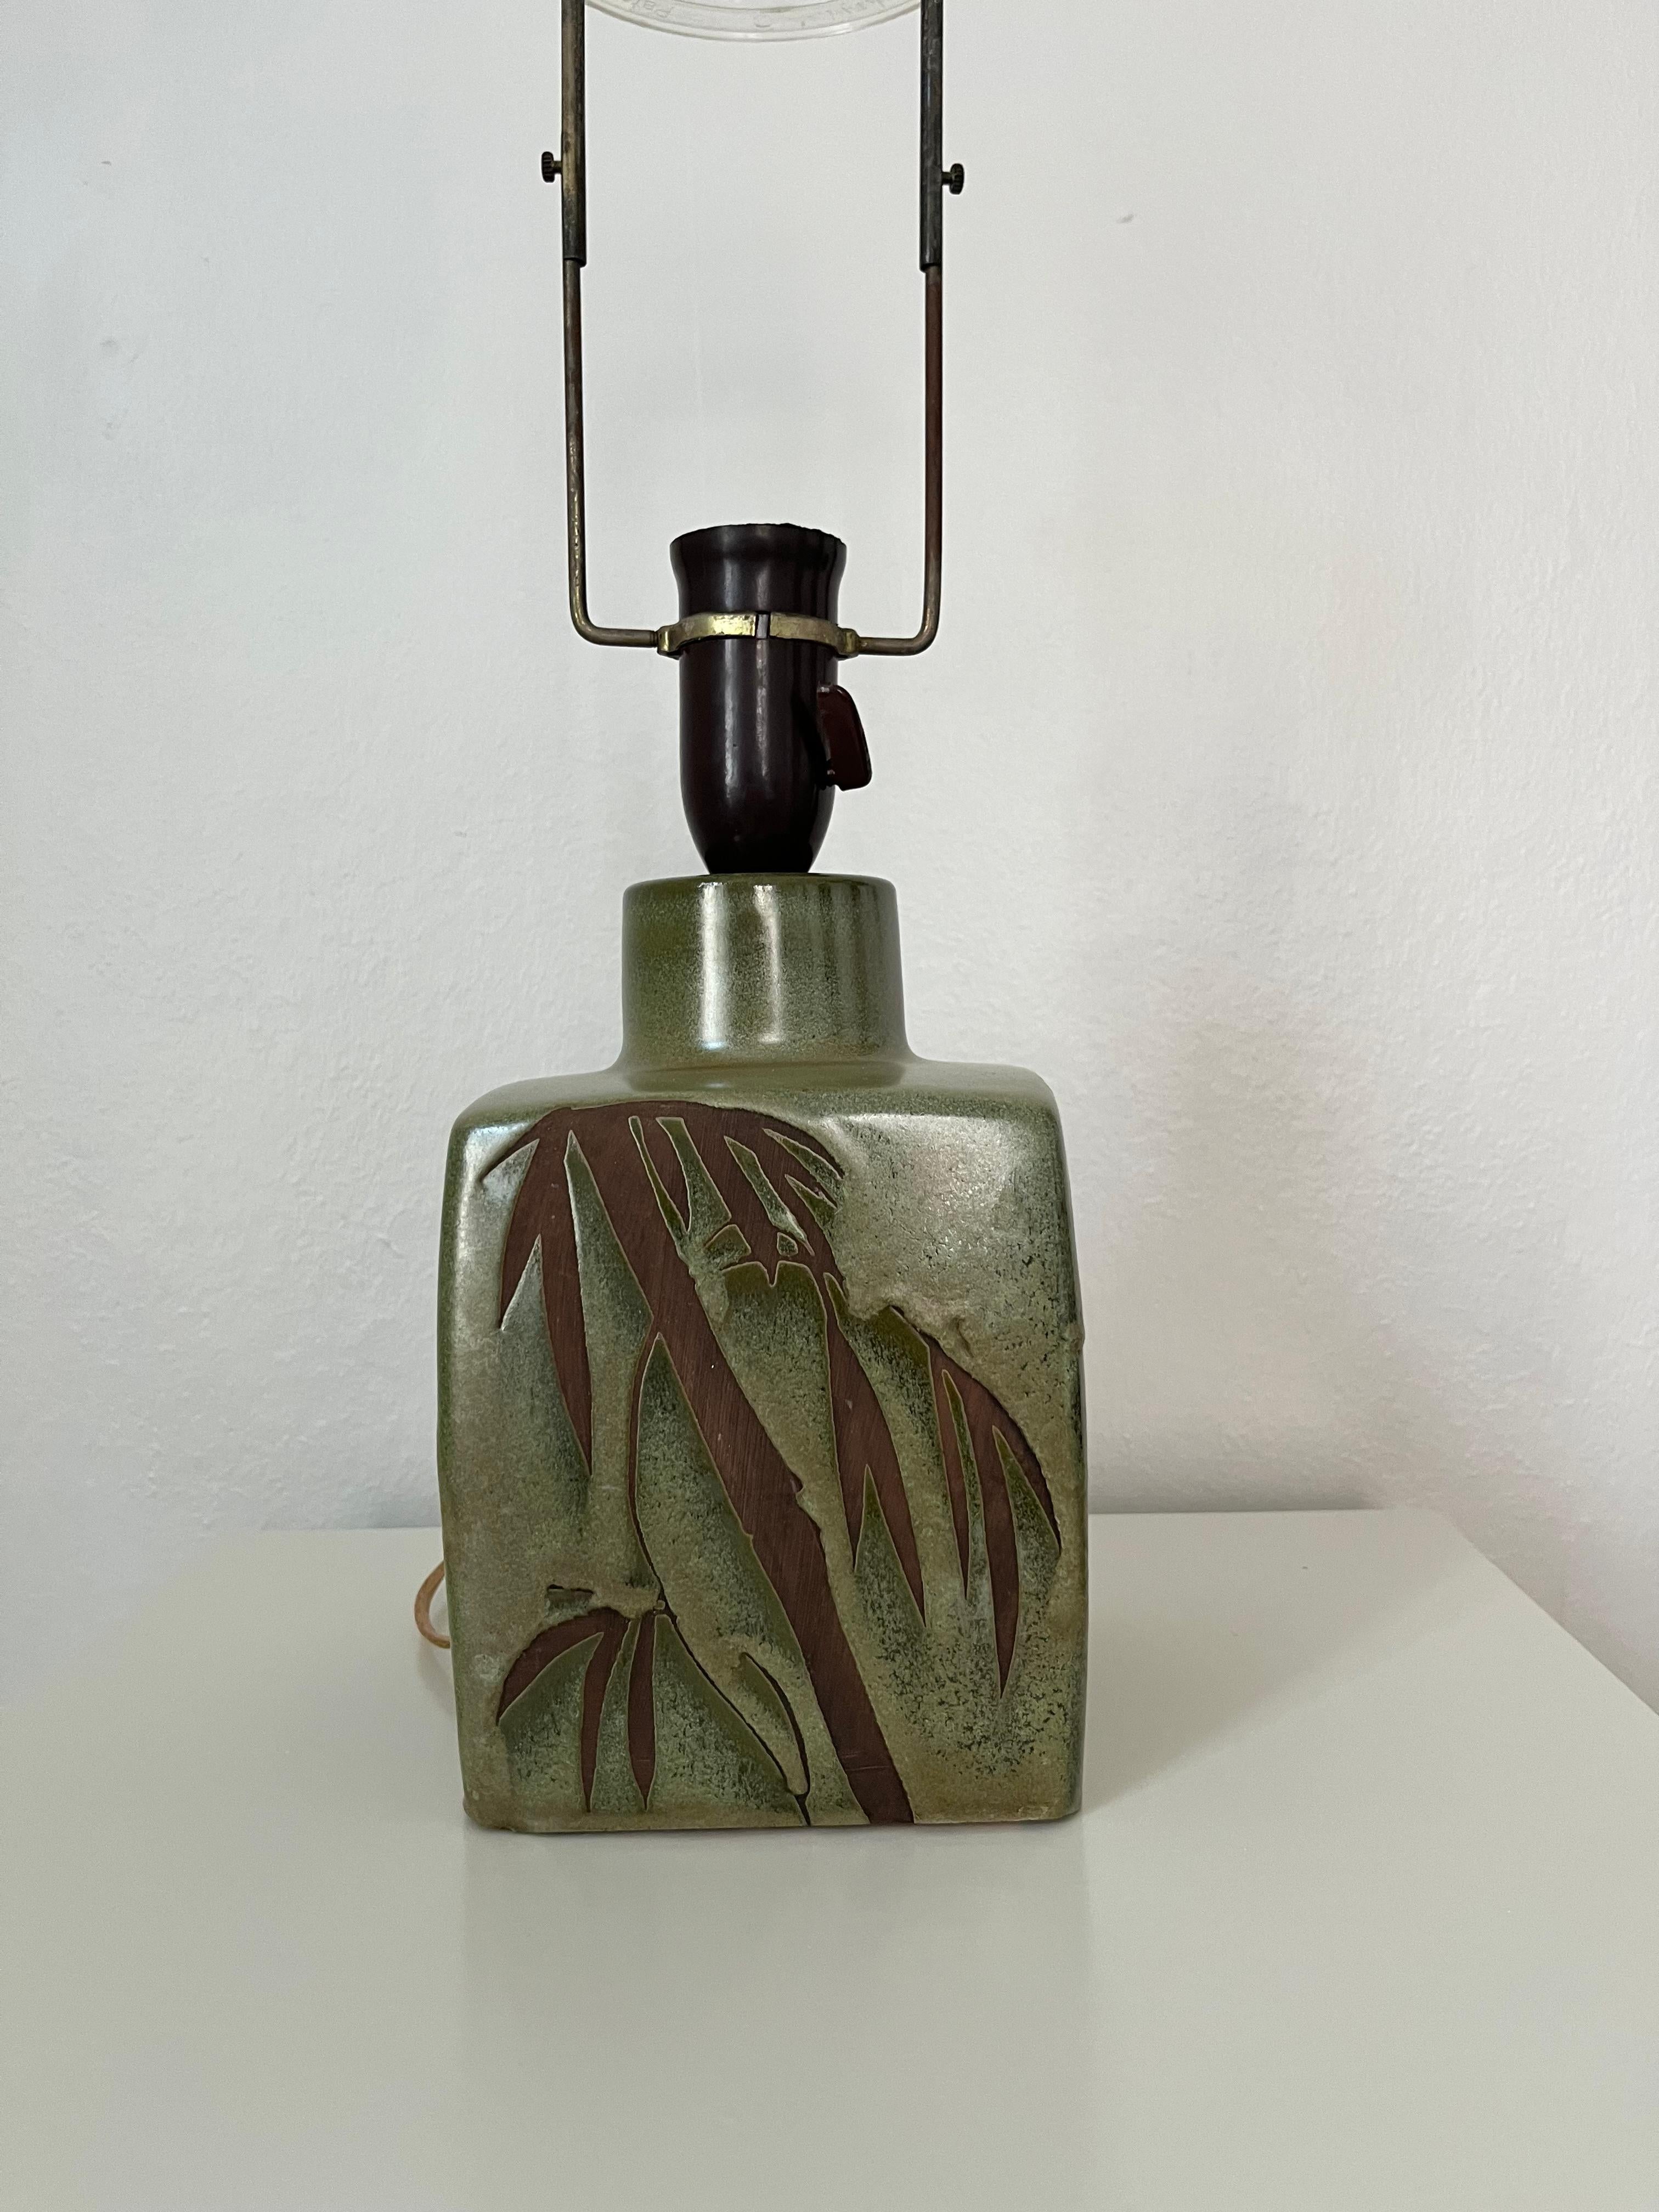 Danish midcentury ceramic table lamp with palm decorations

Danish midcentury ceramic table lamp in a square shape with palm decorations on all sides. Faded green and brown tones. European wired with sucket for E-27 light bulb and is working fine,